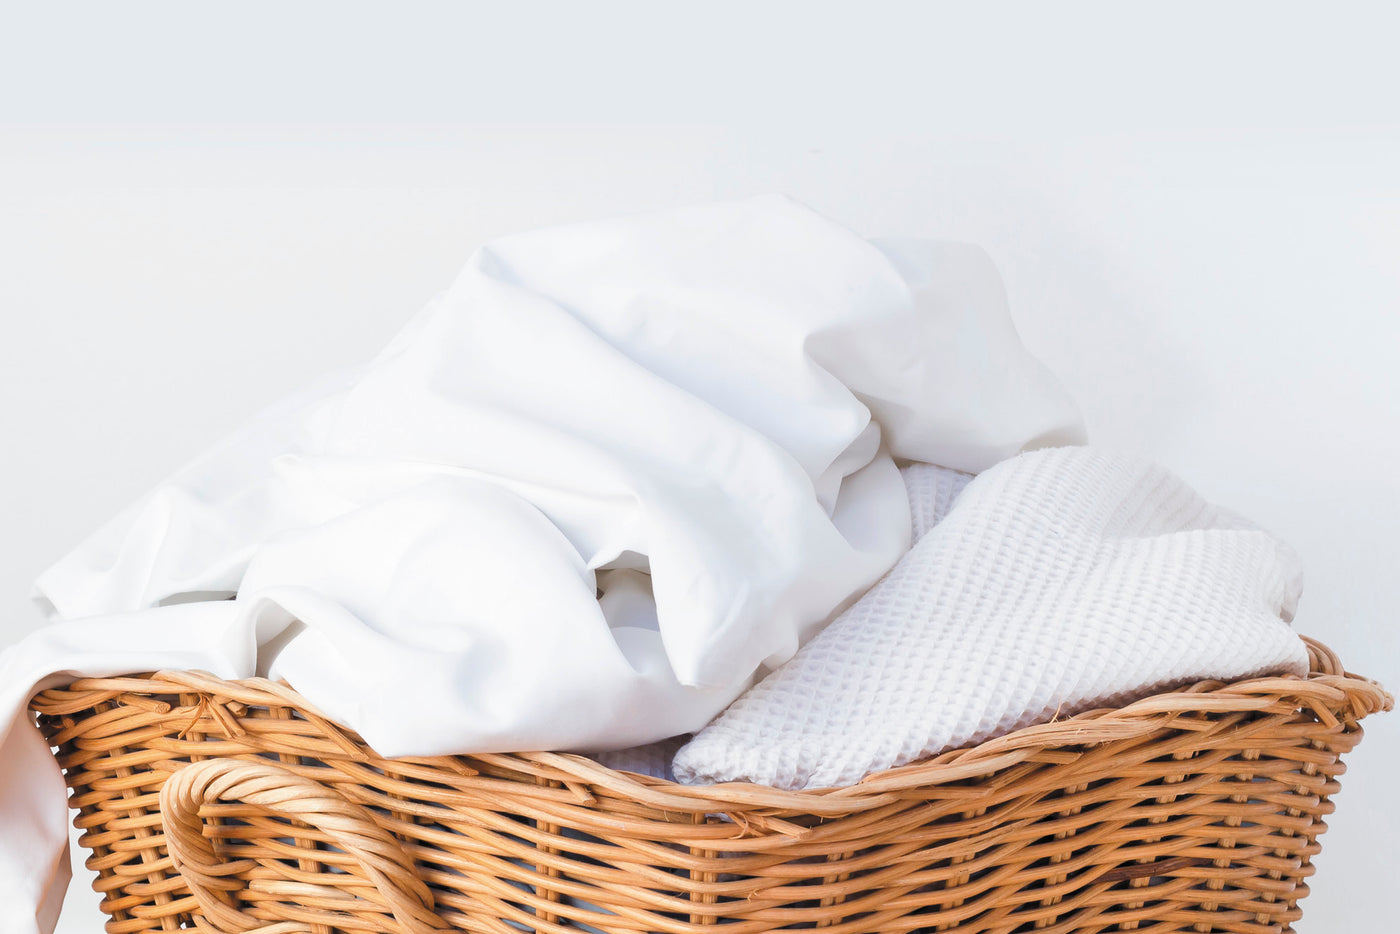 Image of a basket with various white fabrics in it on a white background